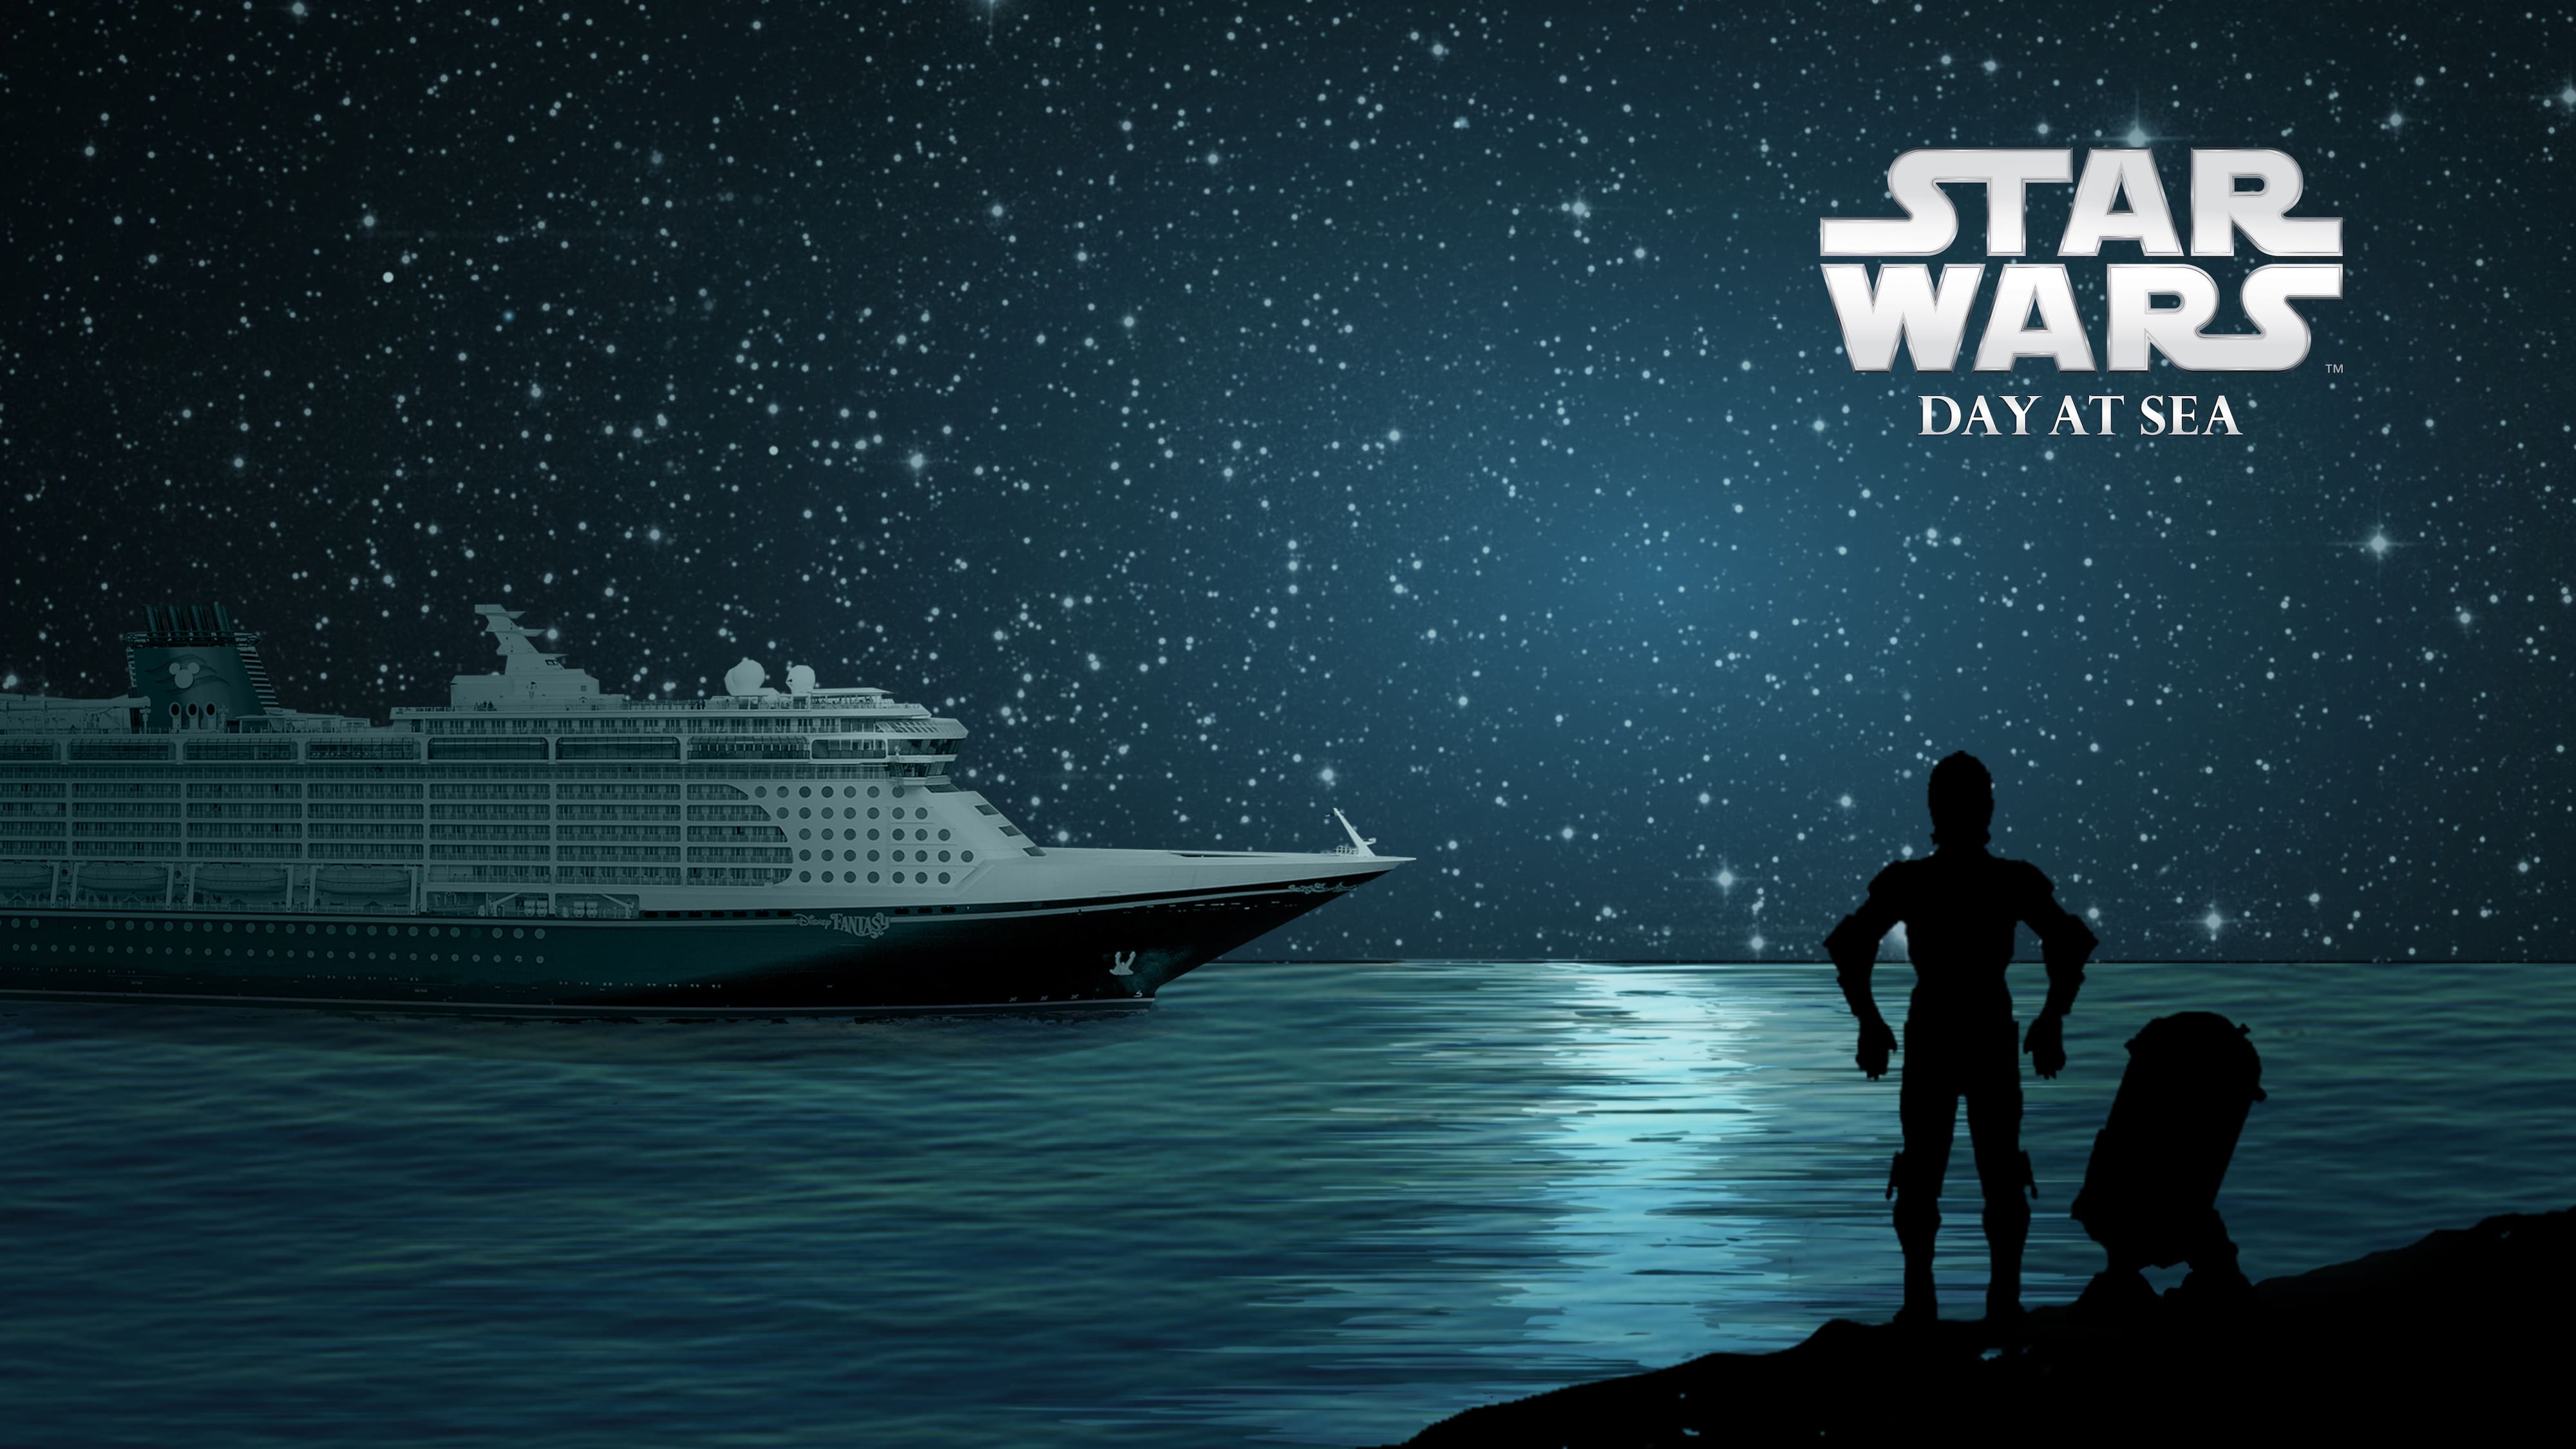 2020 Star Wars Day at Sea Digital Wallpapers The Disney Cruise